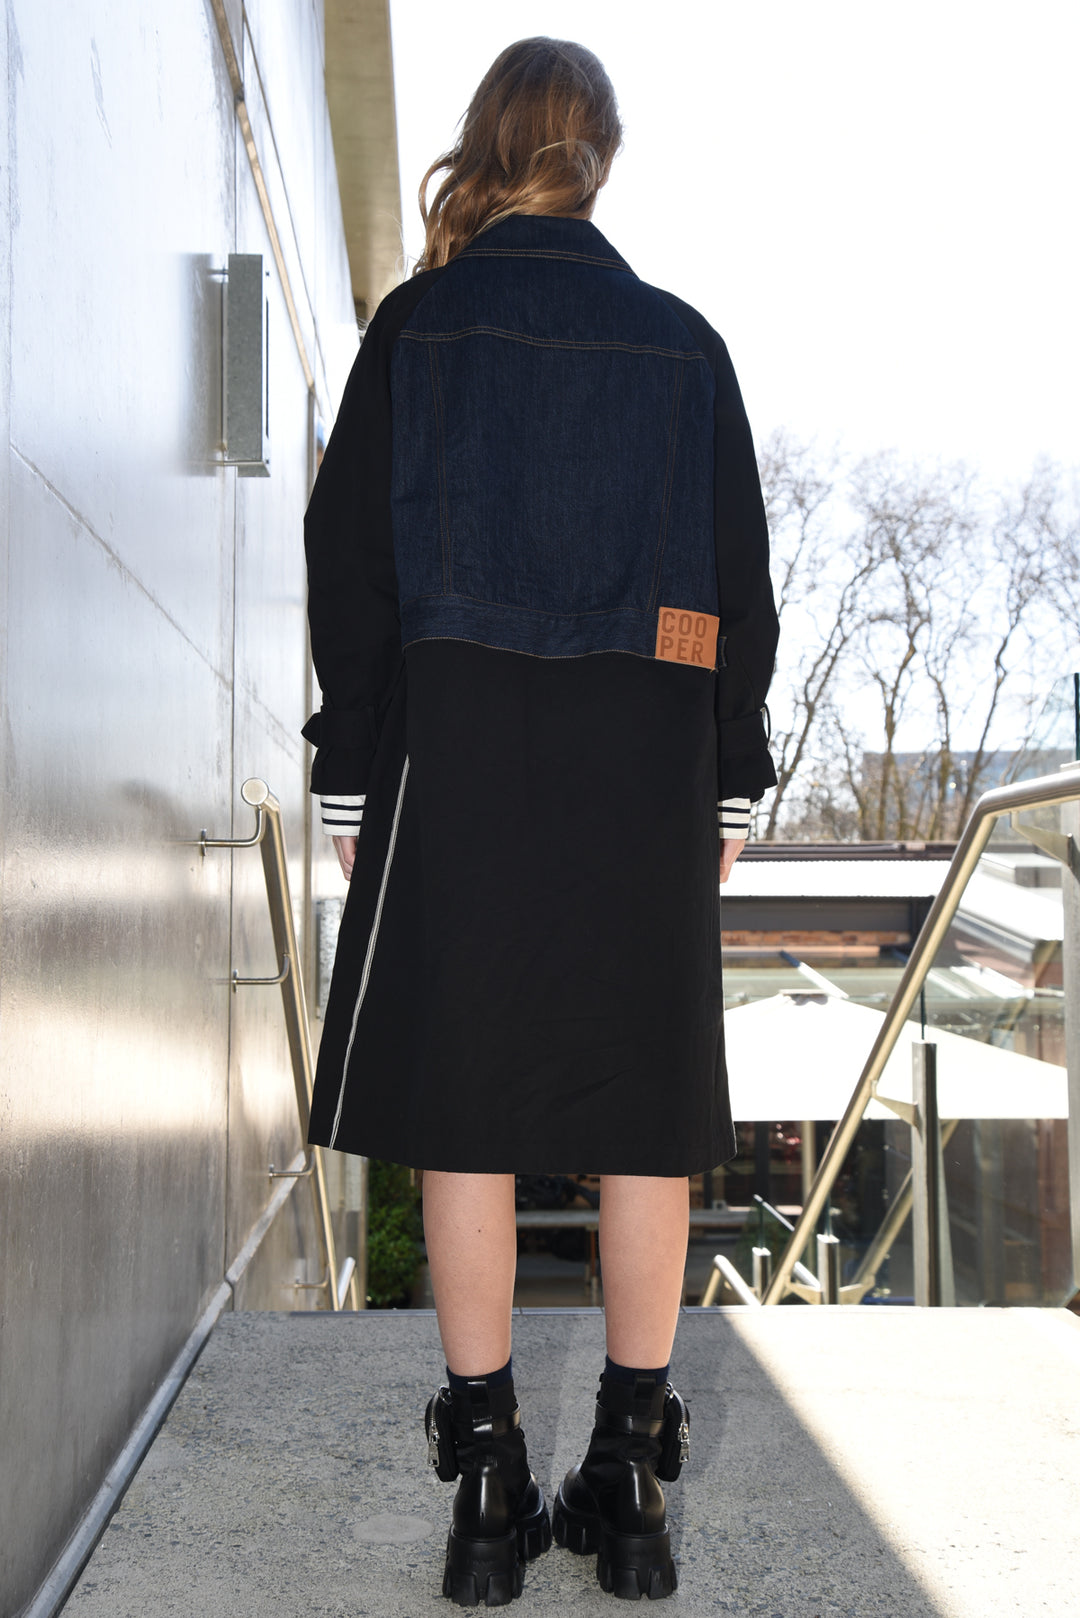 IN THE TRENCHES WITH YOU TRENCH (NAVY/BLACK)